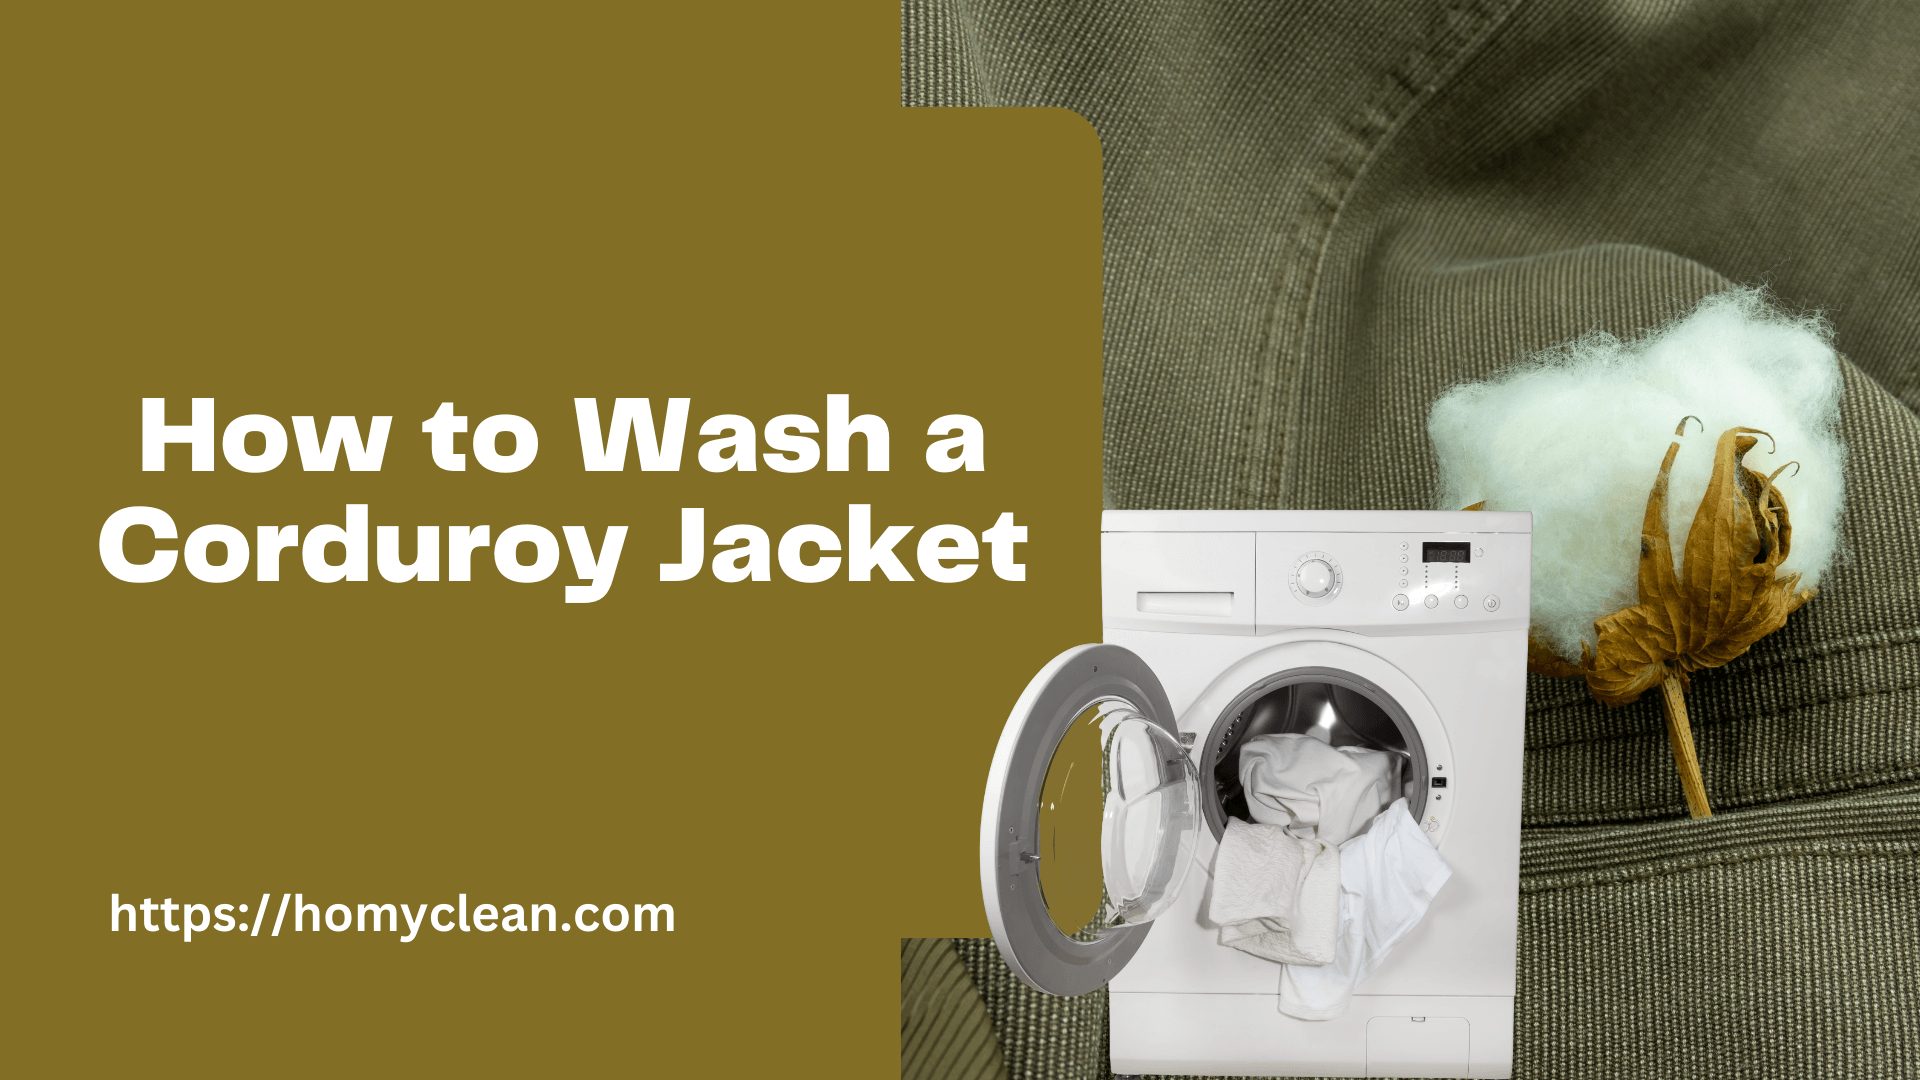 How to Wash Corduroy Jacket: A Step-by-Step Guide